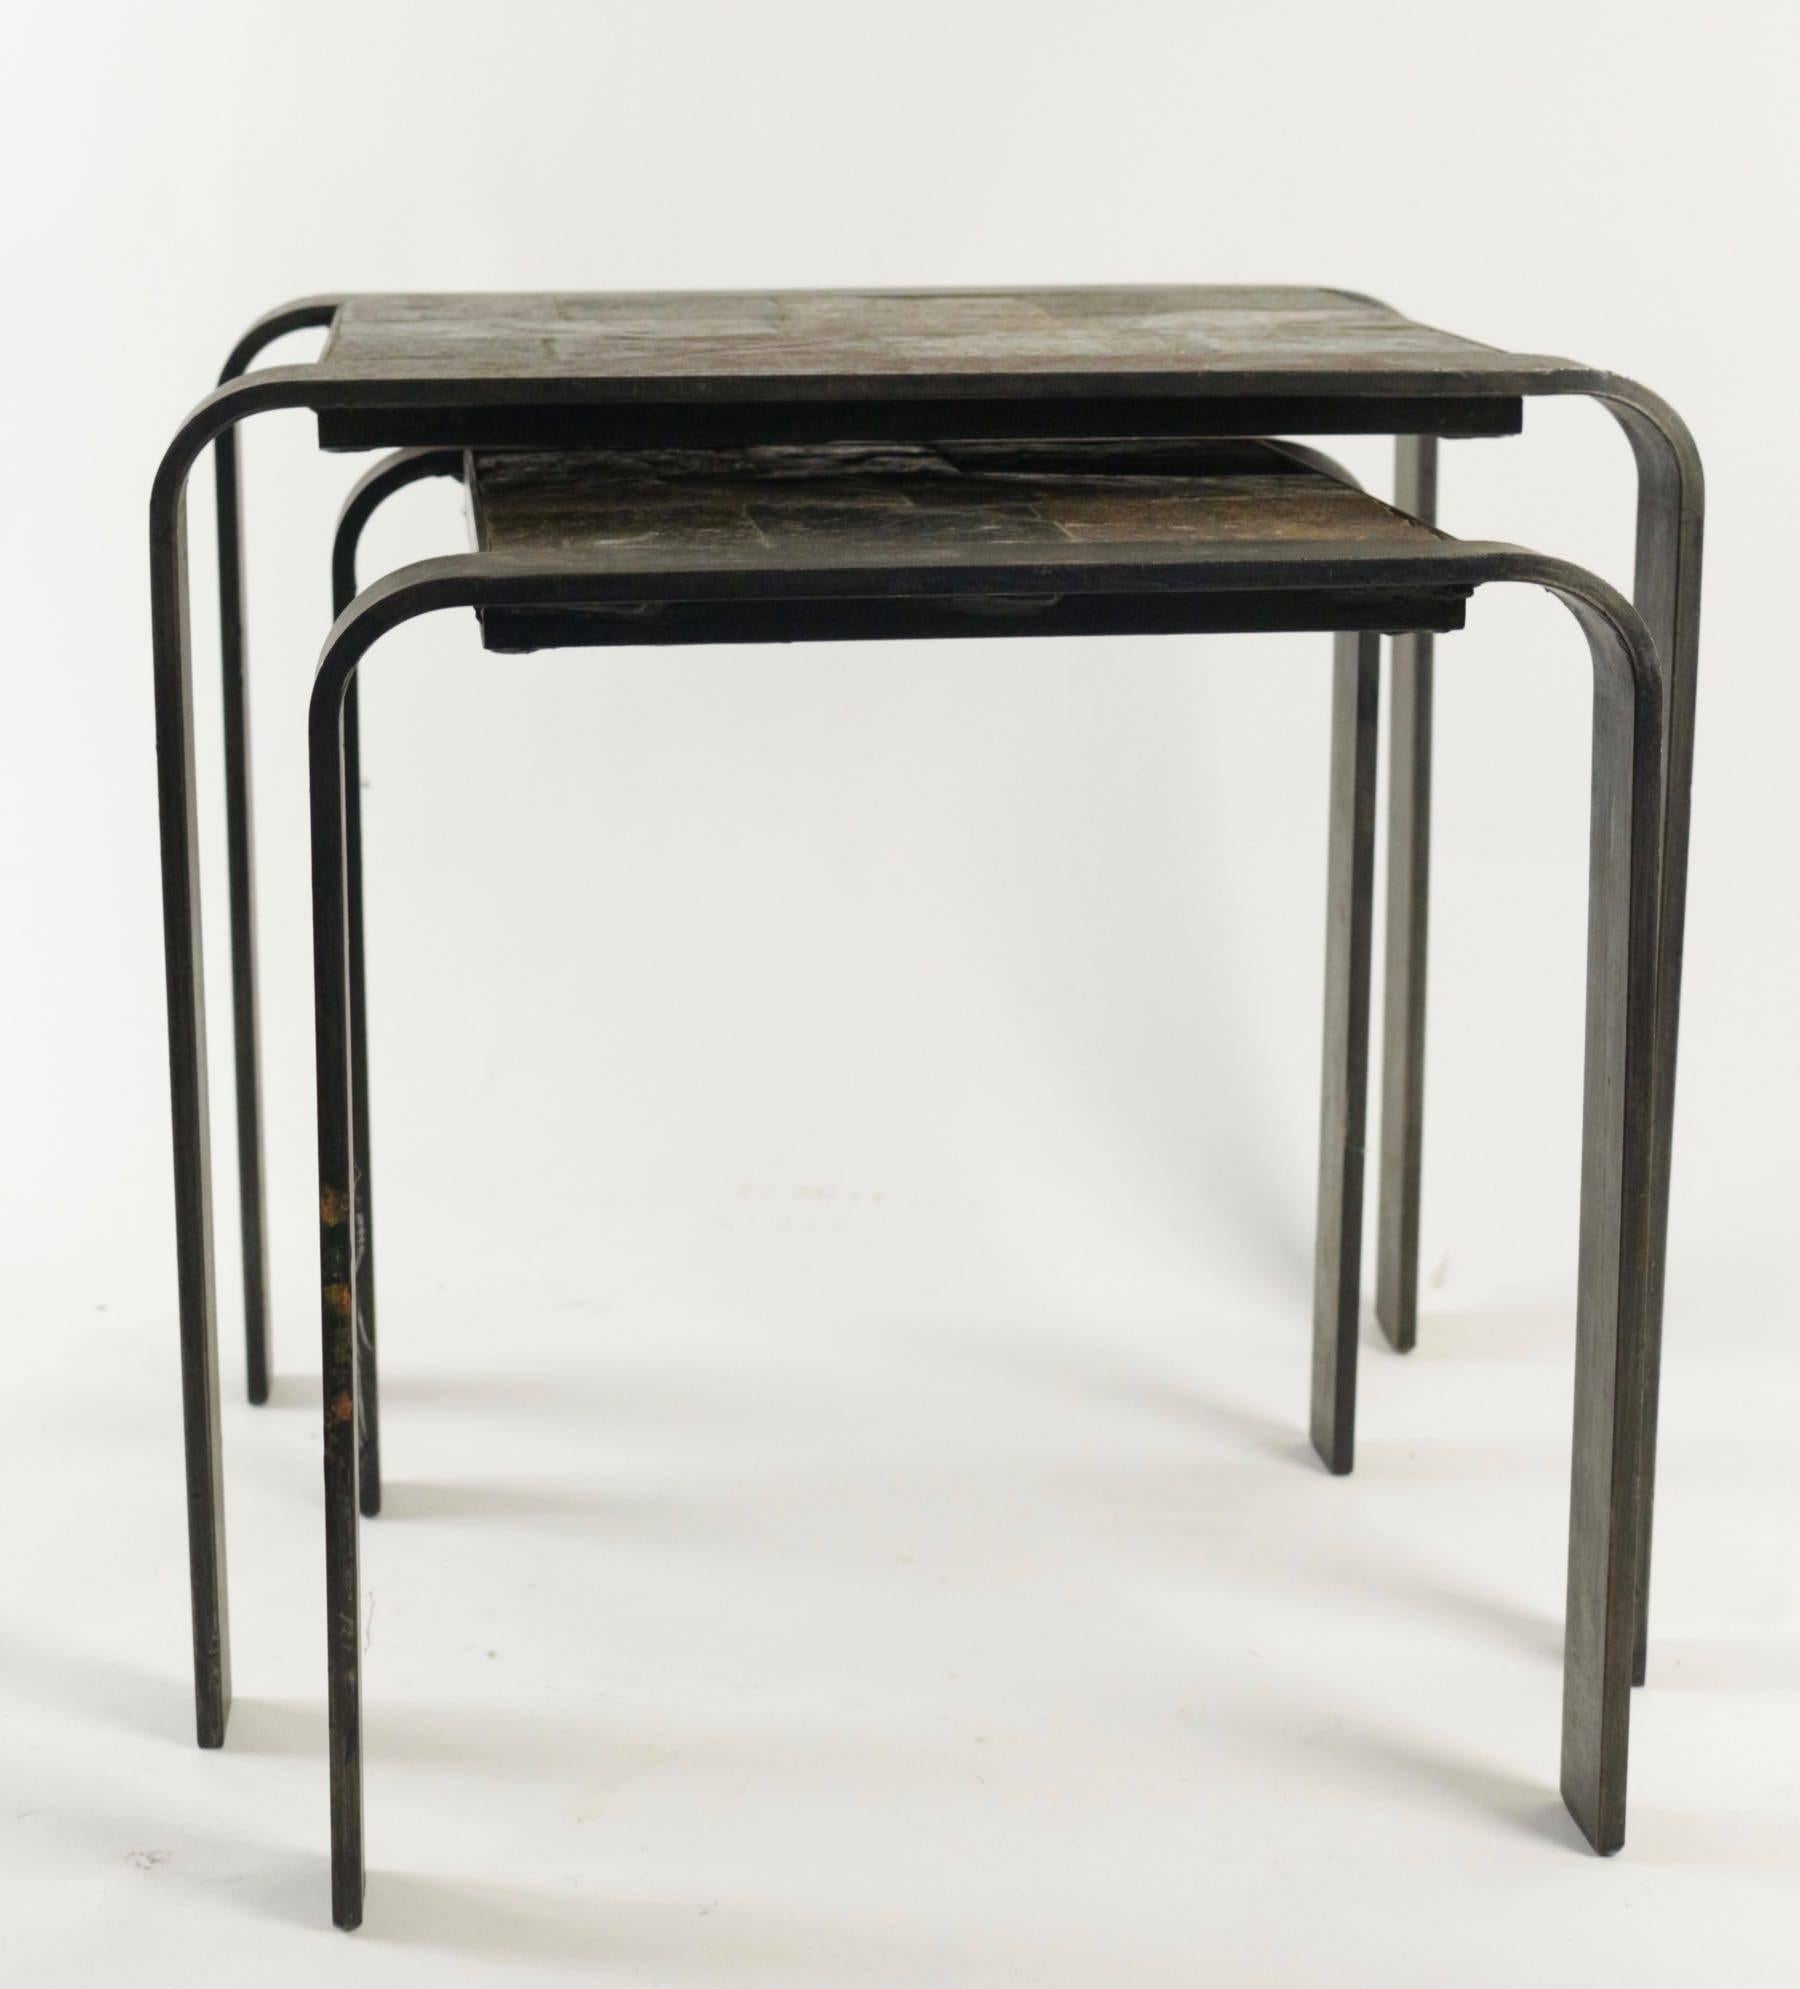 Ceramic Nesting Tables of the 1960s-1970s in Wrought Iron and Slate